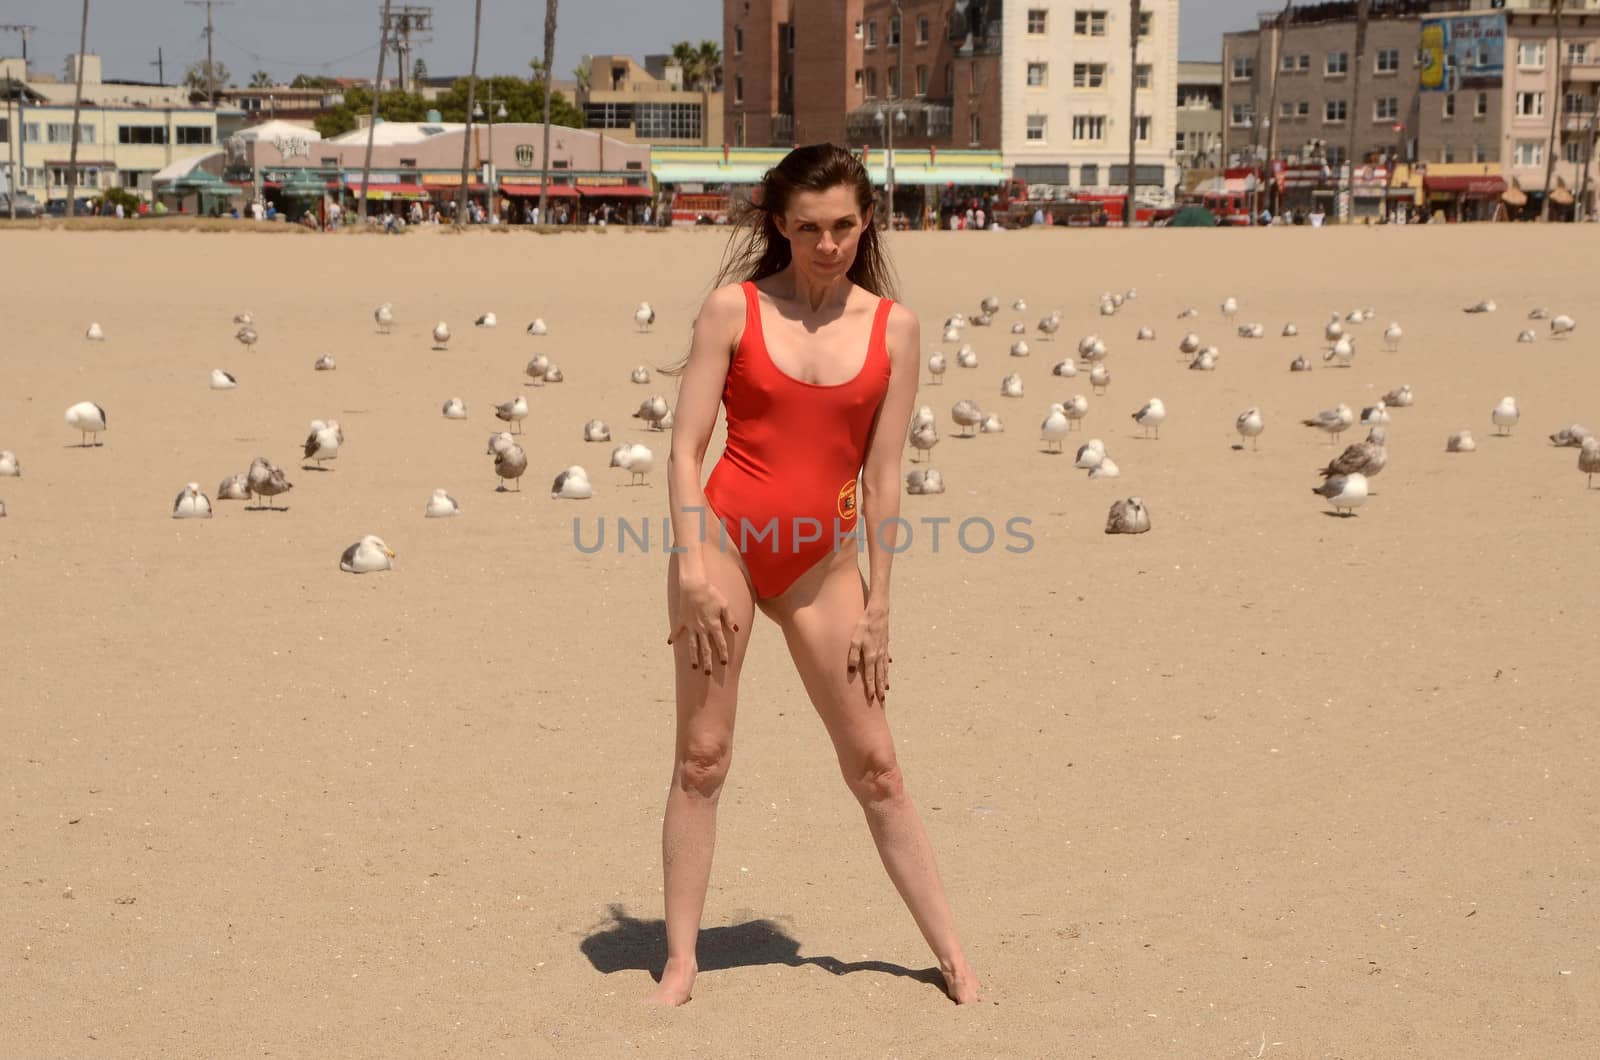 Alicia Arden the "Baywatch" and "General Hospital" actress gets back into the red swimsuit for a Baywatch Themed social media shoot, Venice Beach, CA 05-19-17/ImageCollect by ImageCollect